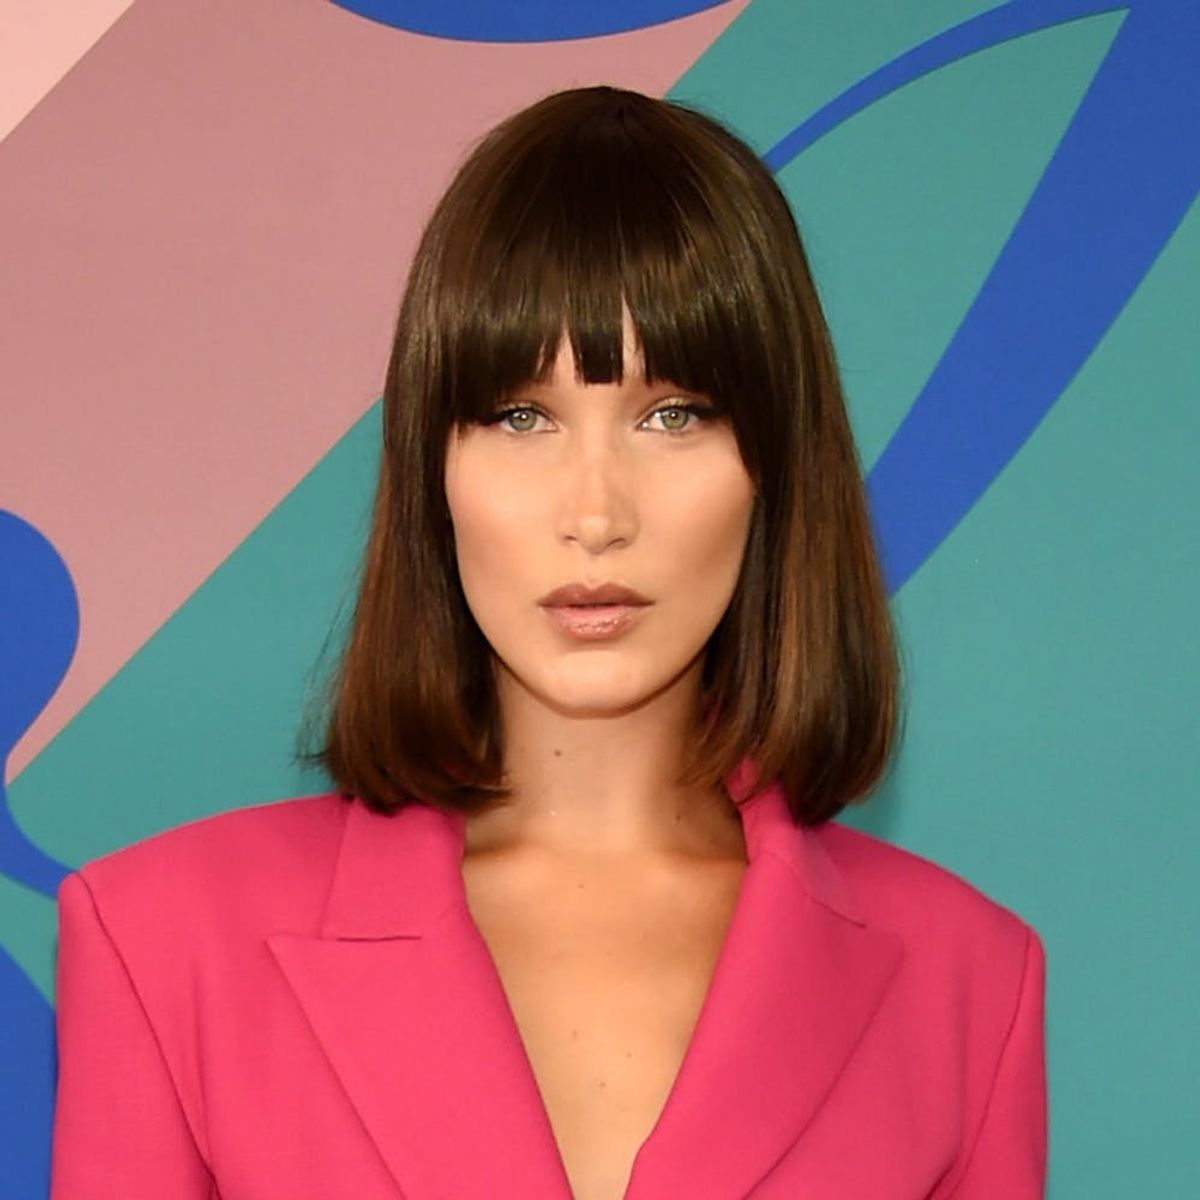 Bella Hadid Is Having a Major ’90s Girl Fashion Moment in London